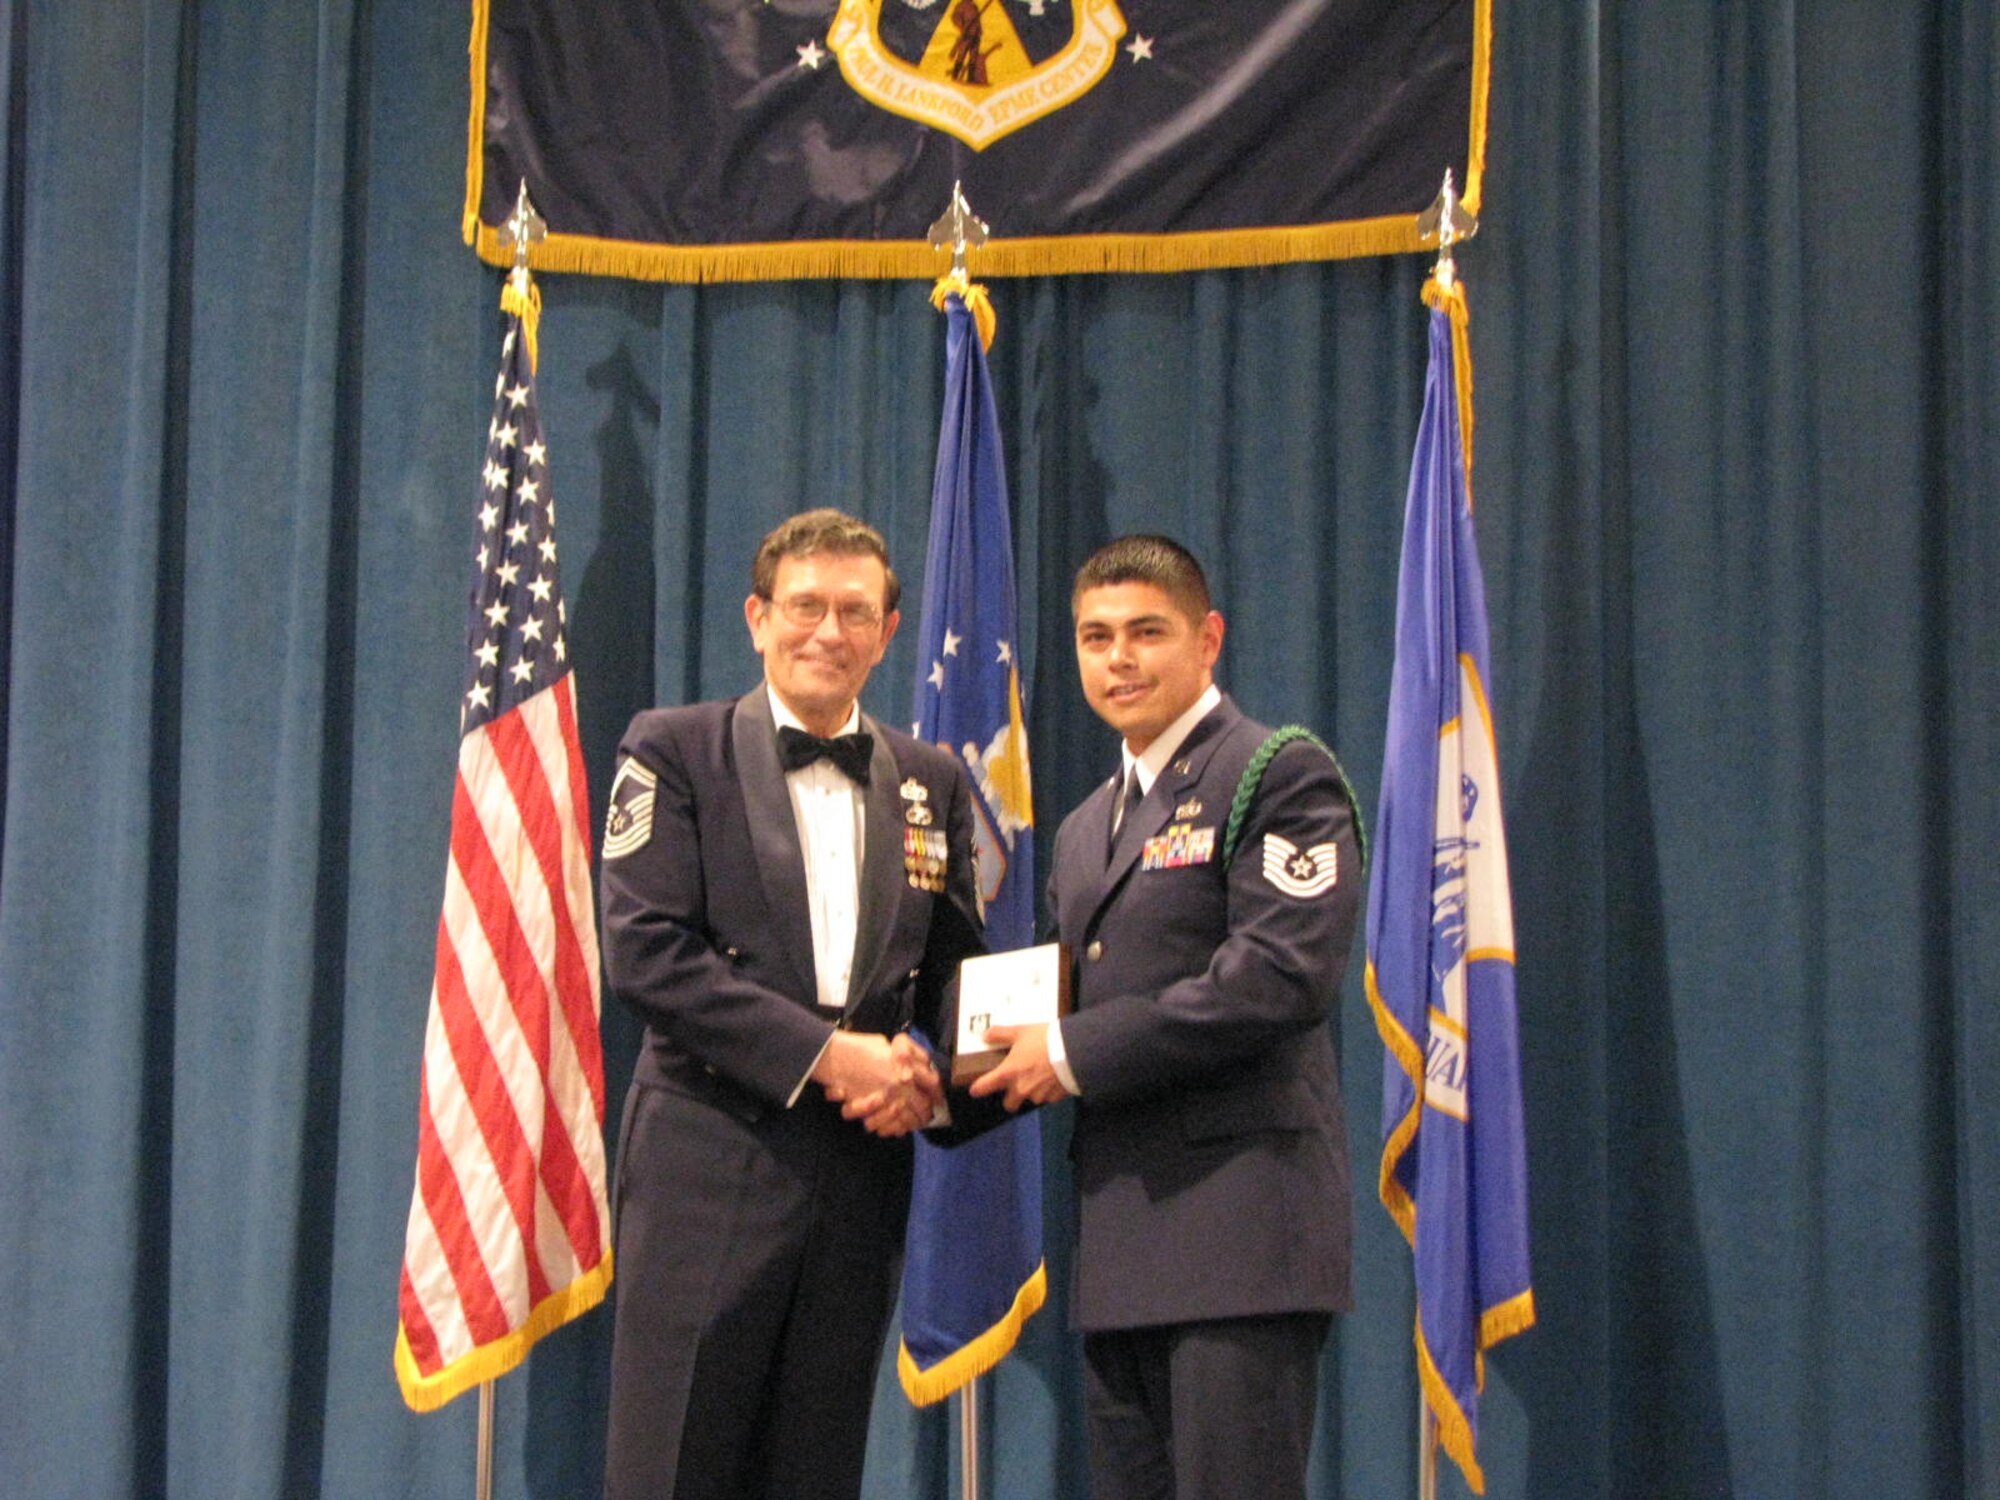 Technical Sgt Rodolfo Solis receives his diploma from Chief Master Sgt (Ret) Lynn Alexander at a Non-Commissioned Officer graduation ceremony at McGhee Tyson Air National Guard Base, TN on Dec. 15.  Solis was among 11 students from the Texas Air National Guard's 149th Figther Wing and 273rd Information Operations Squadron participating in an ANG satellite NCO professional education course where students take a portion of their courses locally and then conclude with a 17-day in-residence course at McGhee Tyson.  (U.S. Air Force photo by Chief Master Sgt Richard Pena)